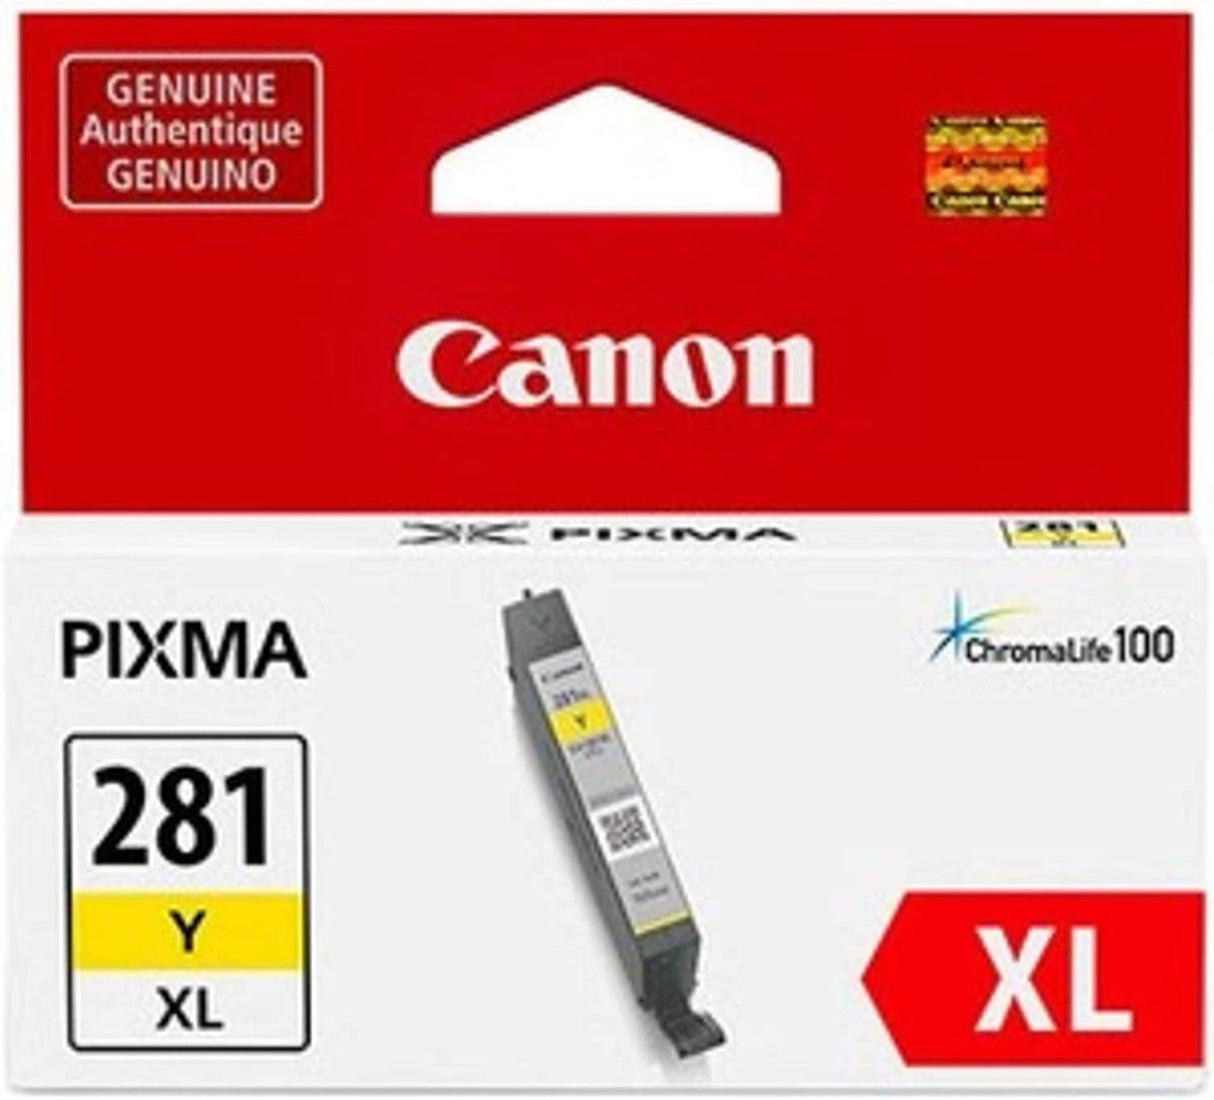 Canon CLI-281XL Yellow Ink Tank, Compatible to TR8520,TR7520,TS9120,TS8120 and TS6120 Printers (2036C001) Yellow XL Ink